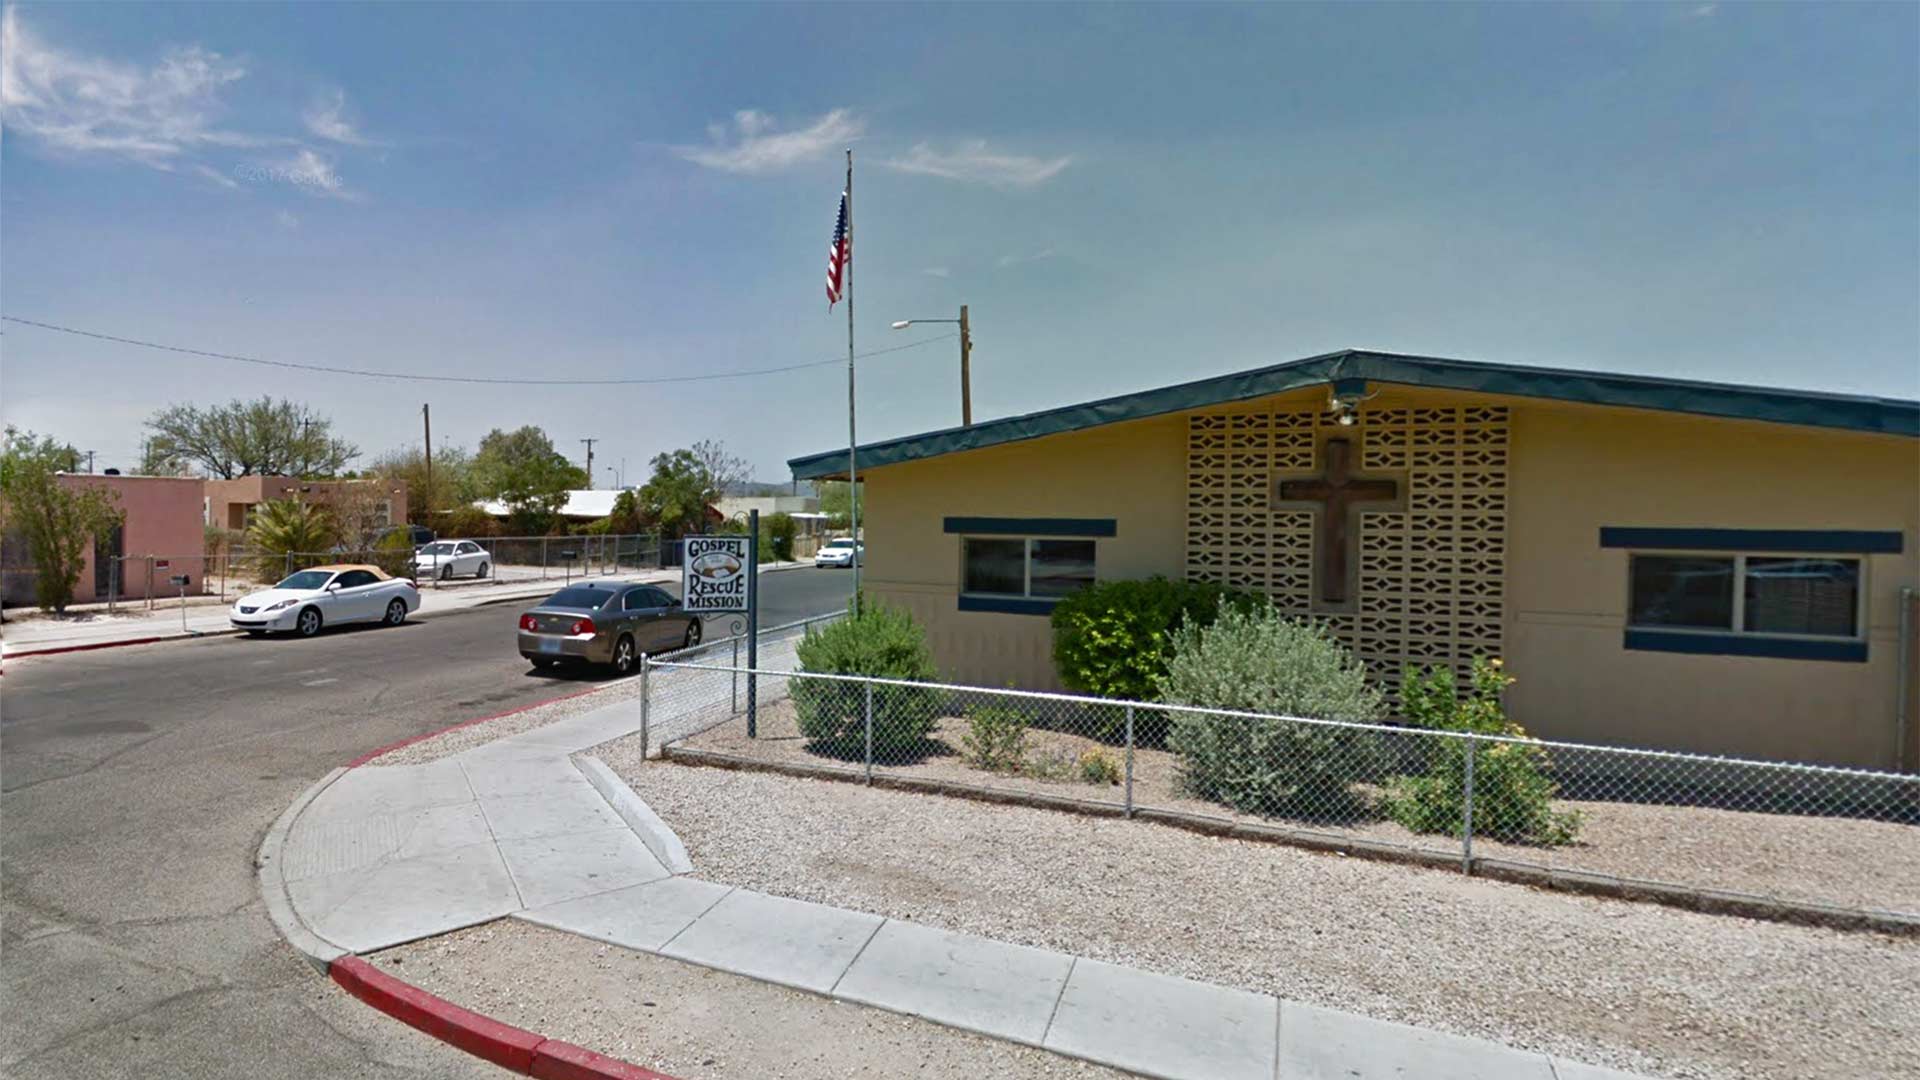 Google Street View image of the Gospel Rescue Mission, 312 W. 28th St.